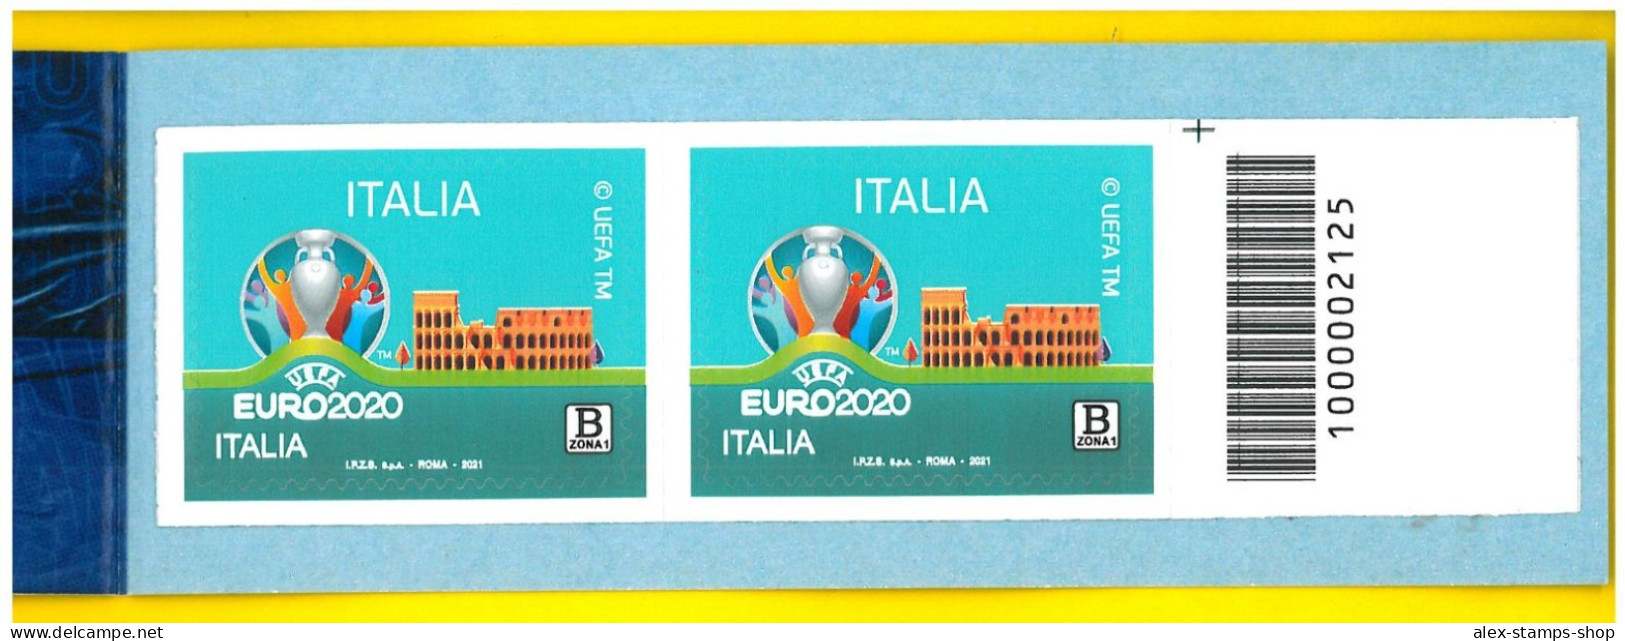 ITALIA 2021 NEW BOOKLET EUROPEAN 2020 - BARCODE NUMBER 023 - Booklets